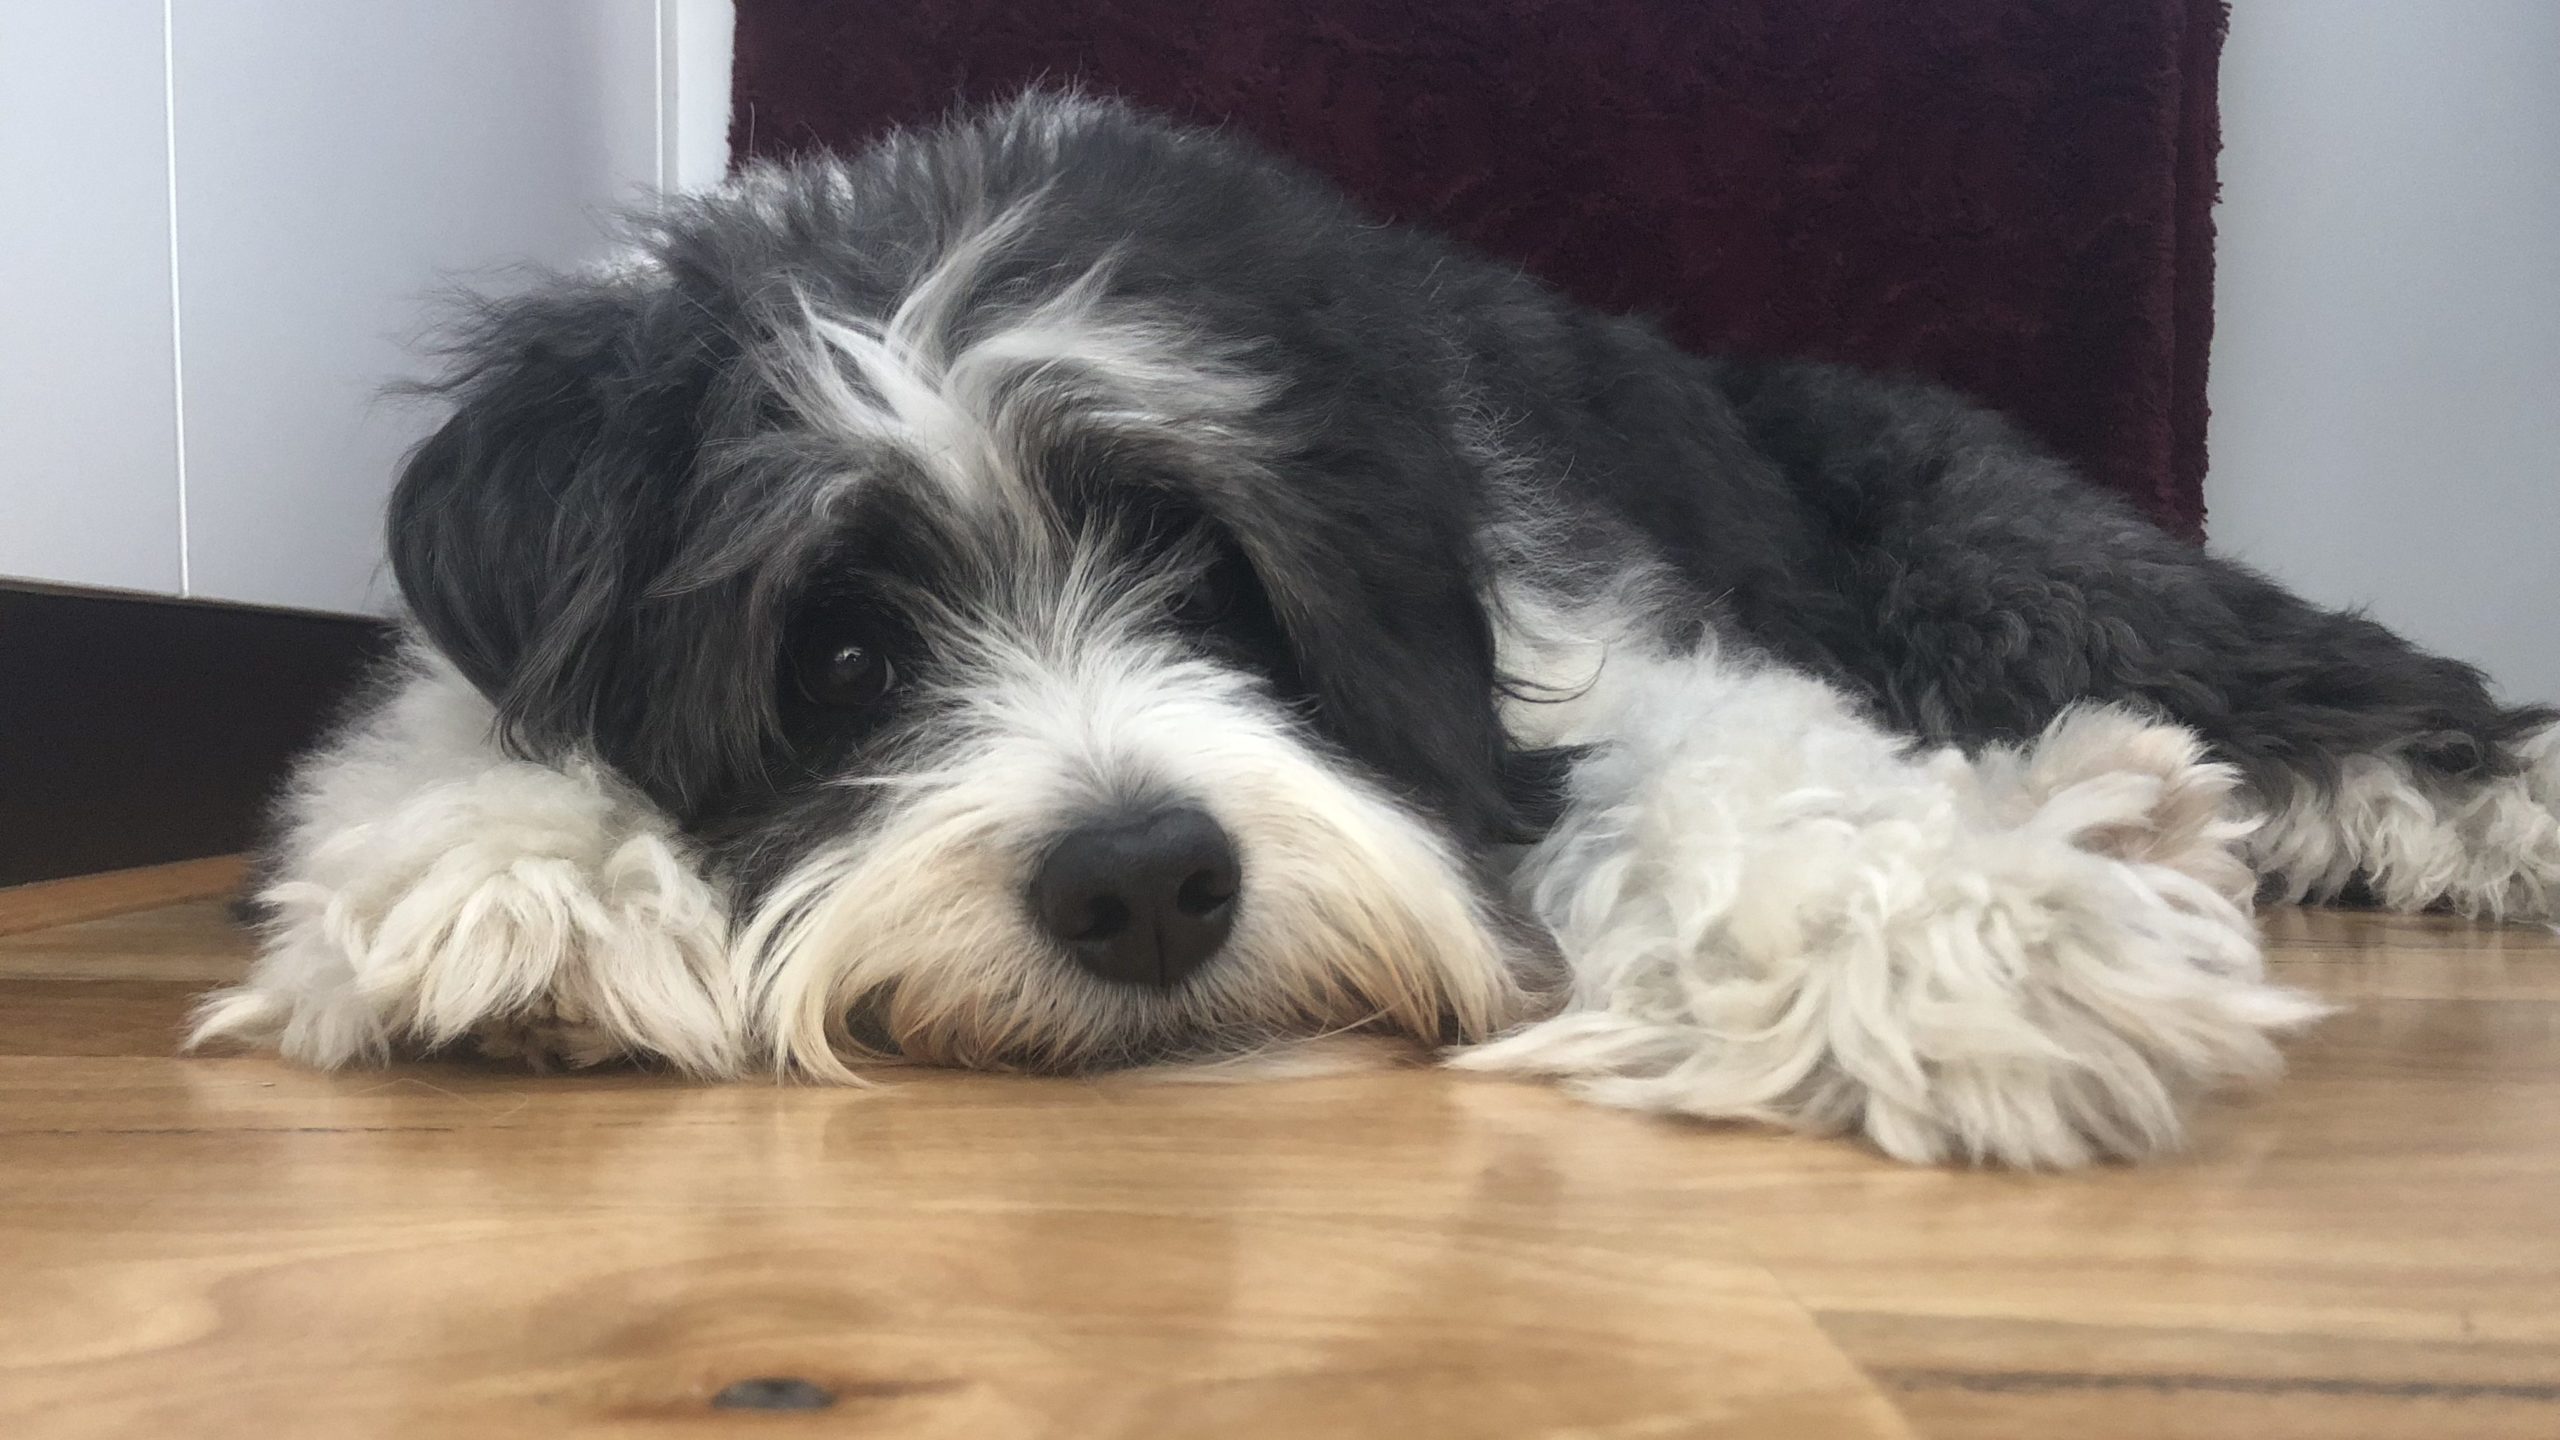 Black and white shaggy dog lying down on a wooden floor